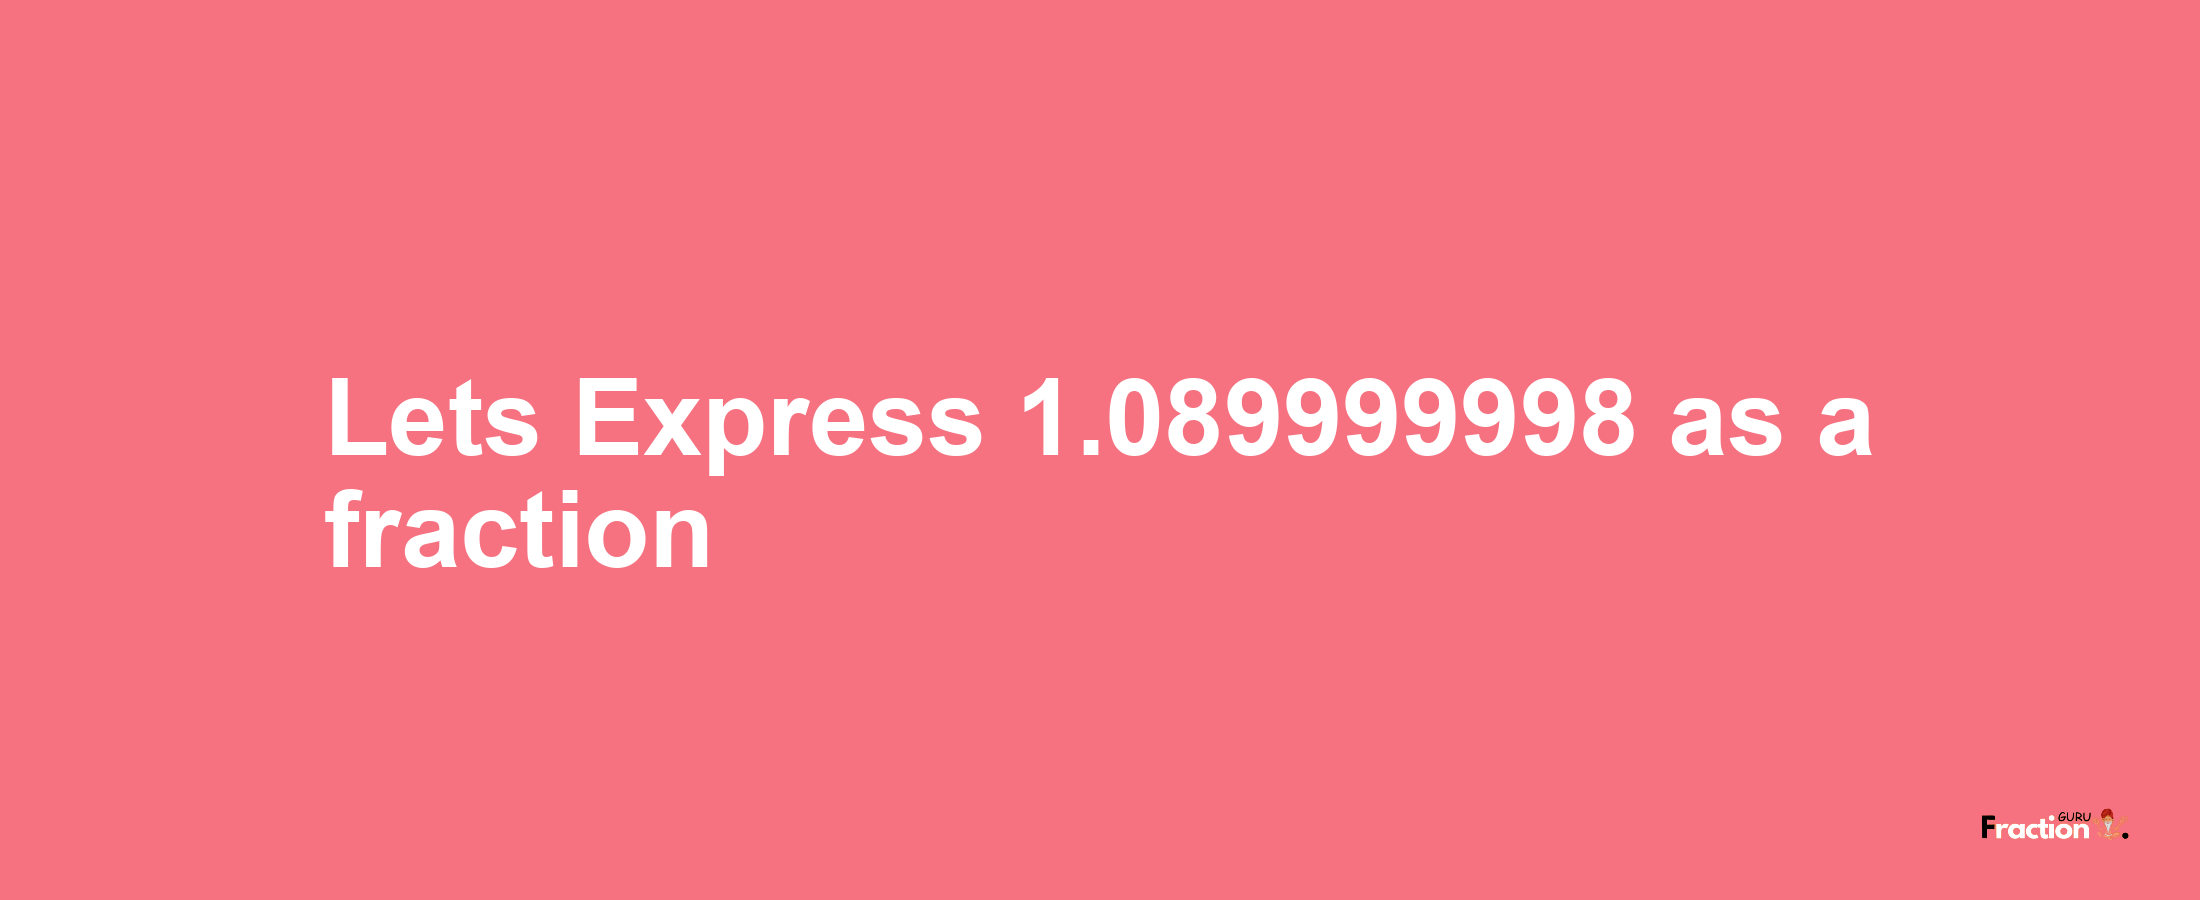 Lets Express 1.089999998 as afraction